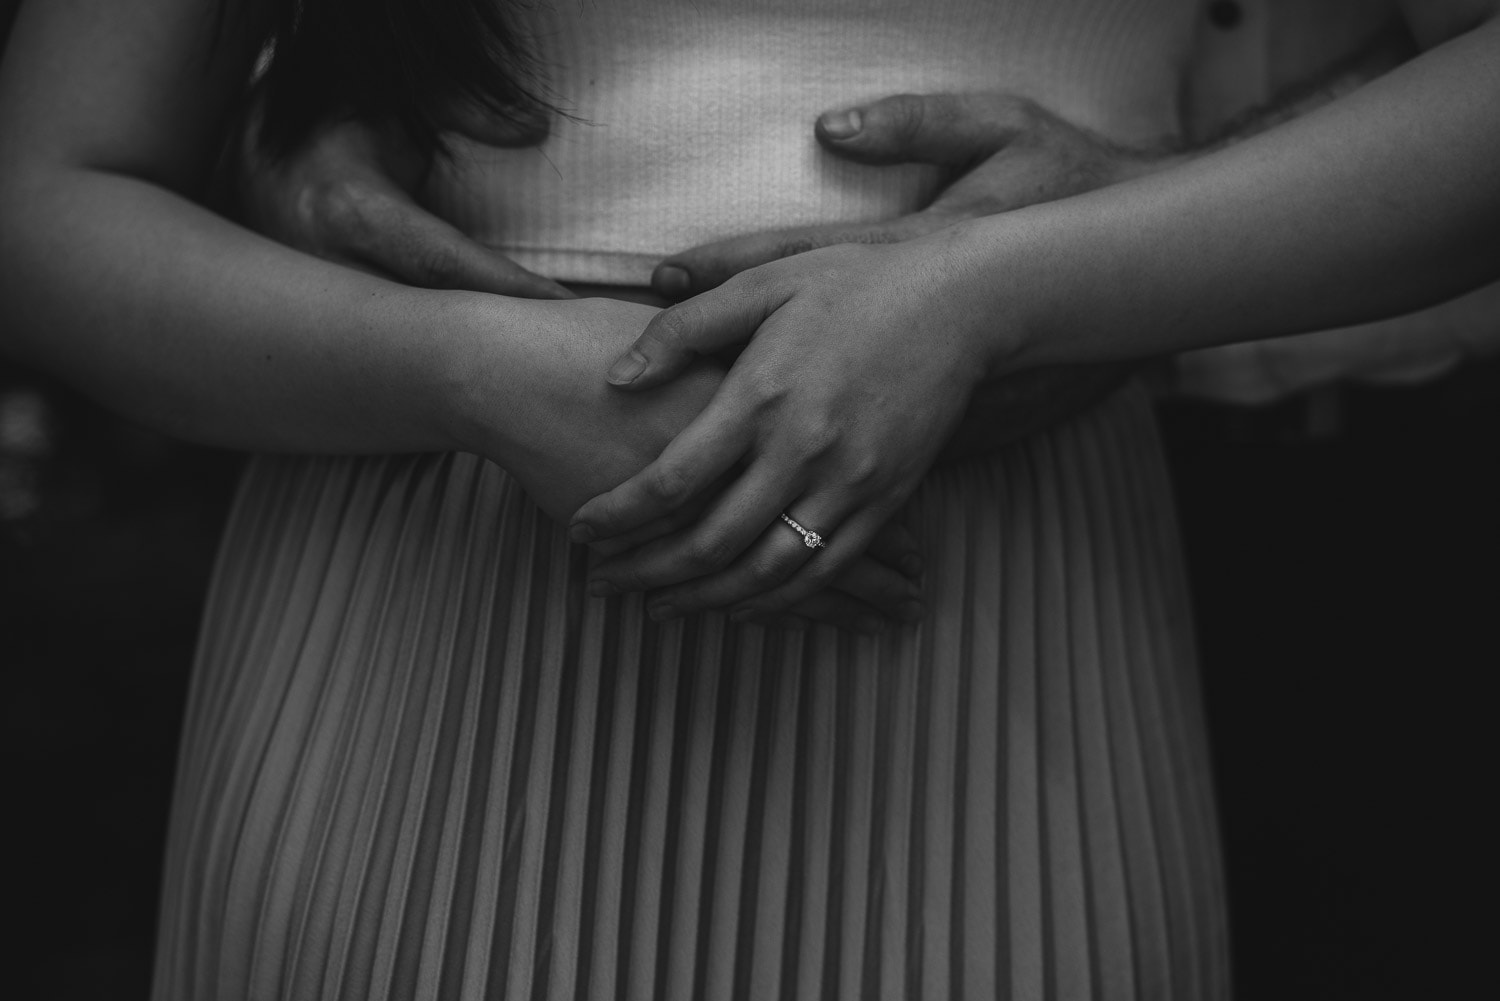 Enagaged couple's hands in black and white